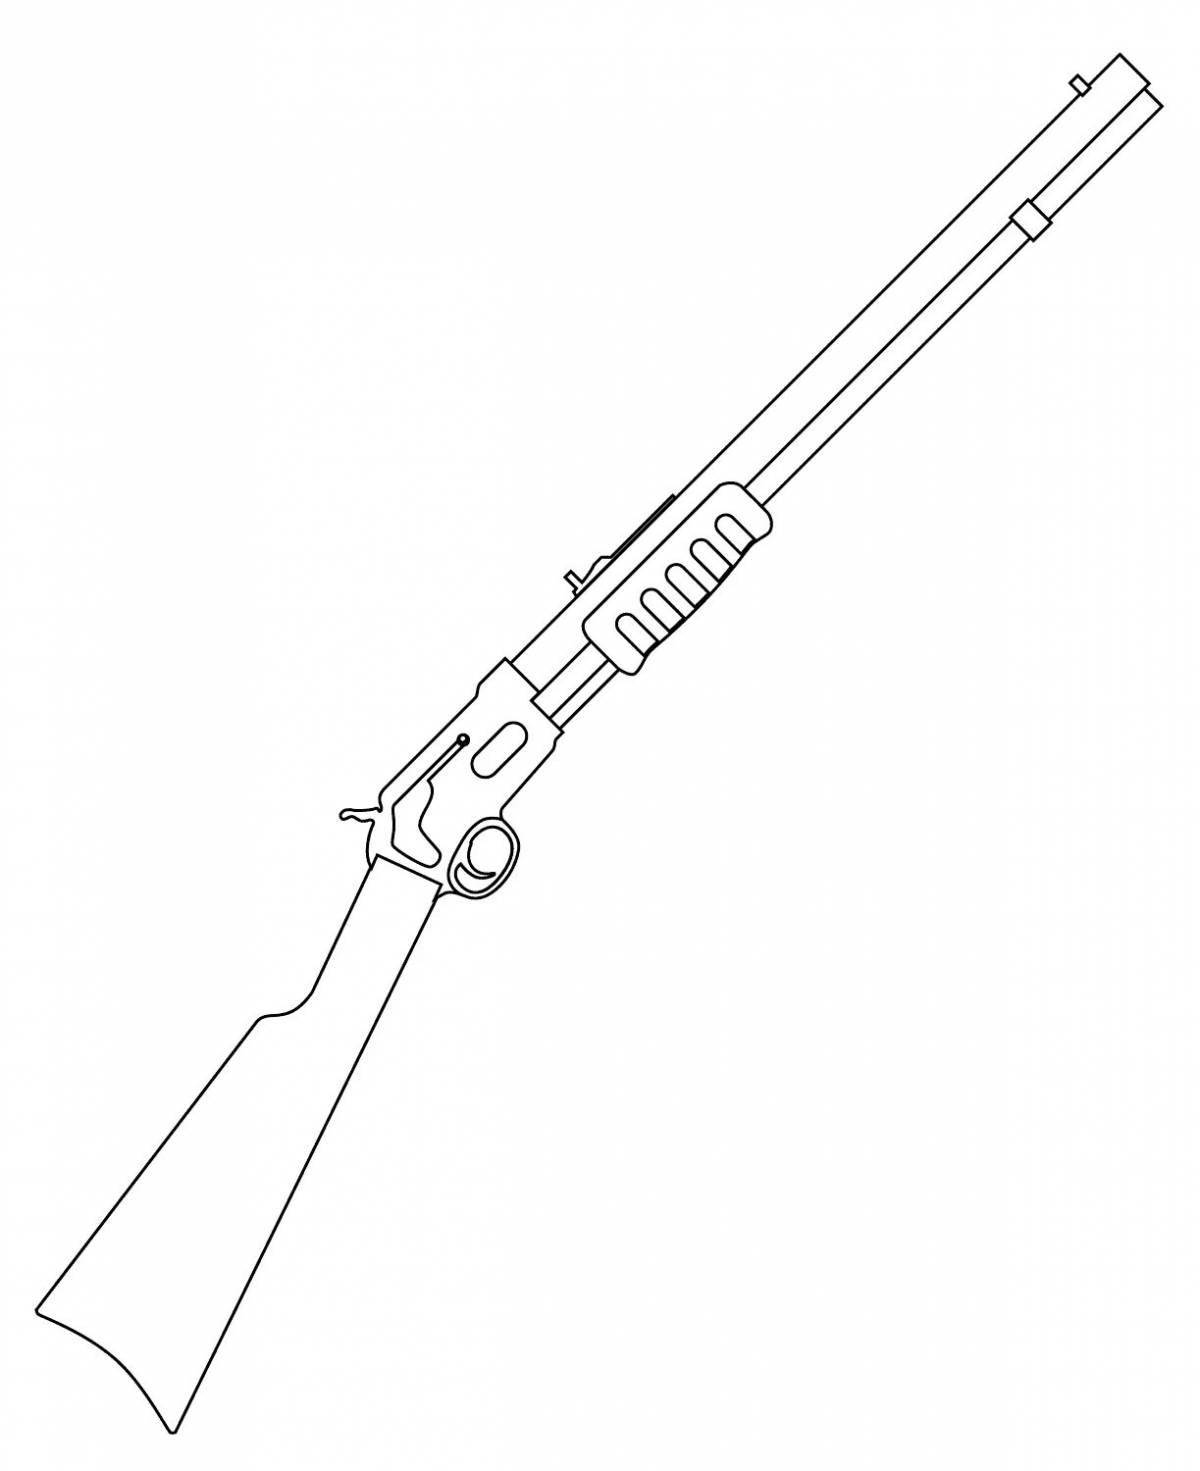 Coloring page attractive firearms